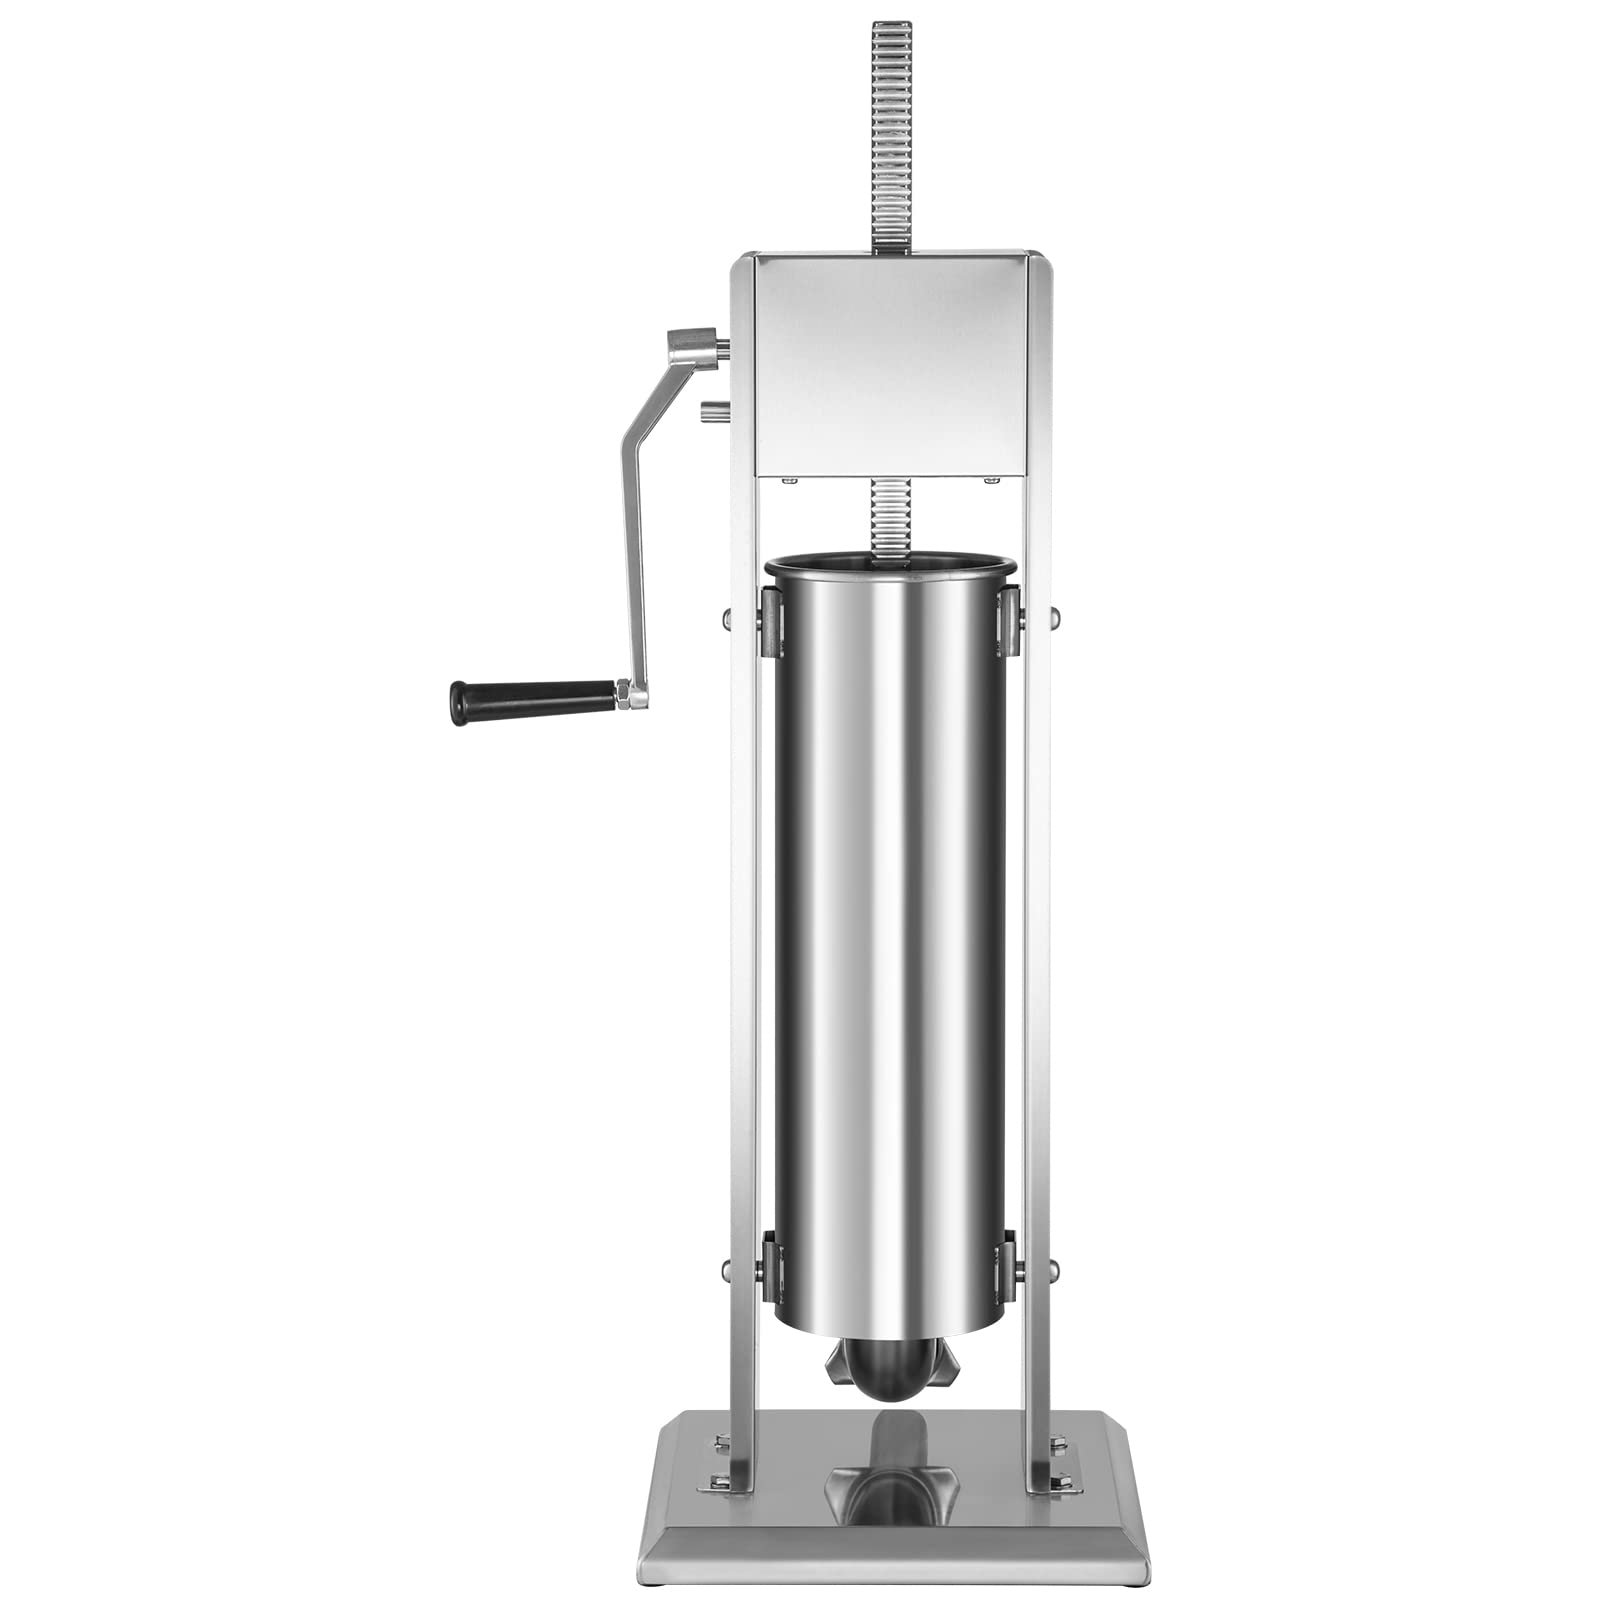 VEVOR Two Speed 304 Stainless Steel Vertical Stuffer Sausage Filling Machine with 4 Stuffing Tubes, 15LBS/7L Capacity, Silver